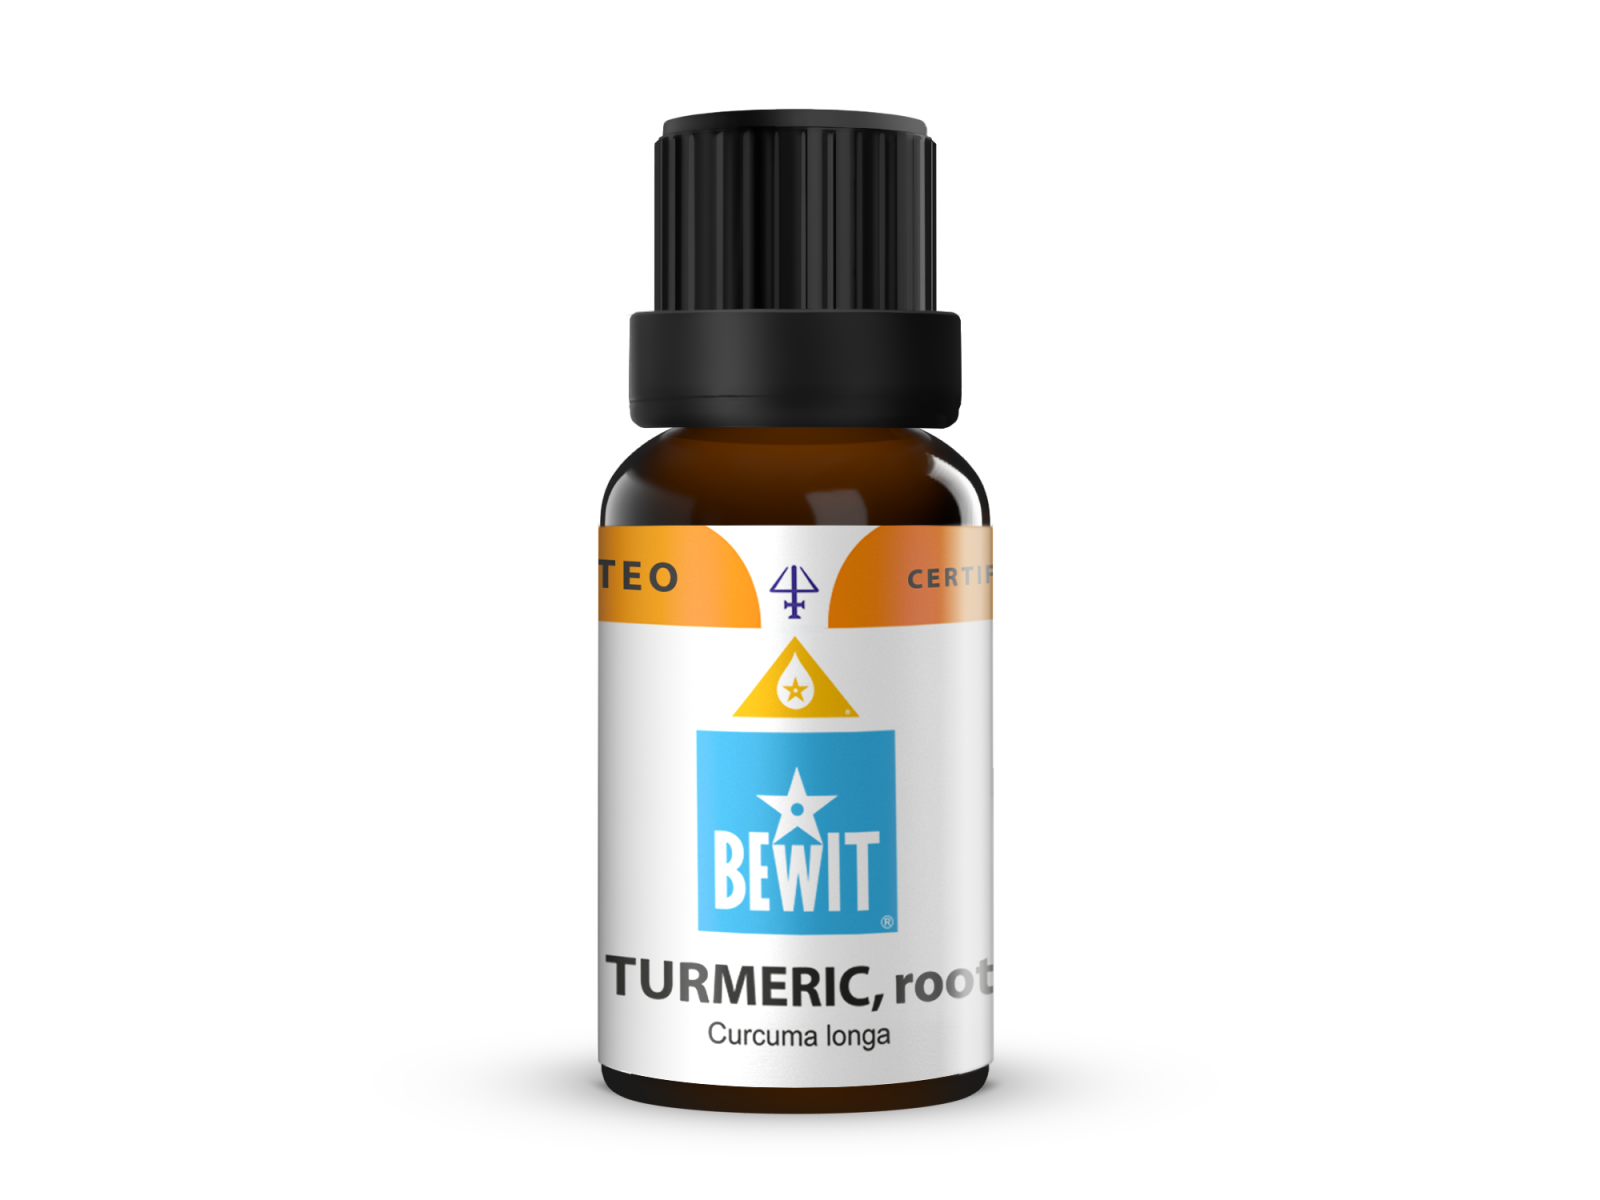 BEWIT Turmeric, root - 100% pure essential oil - 3